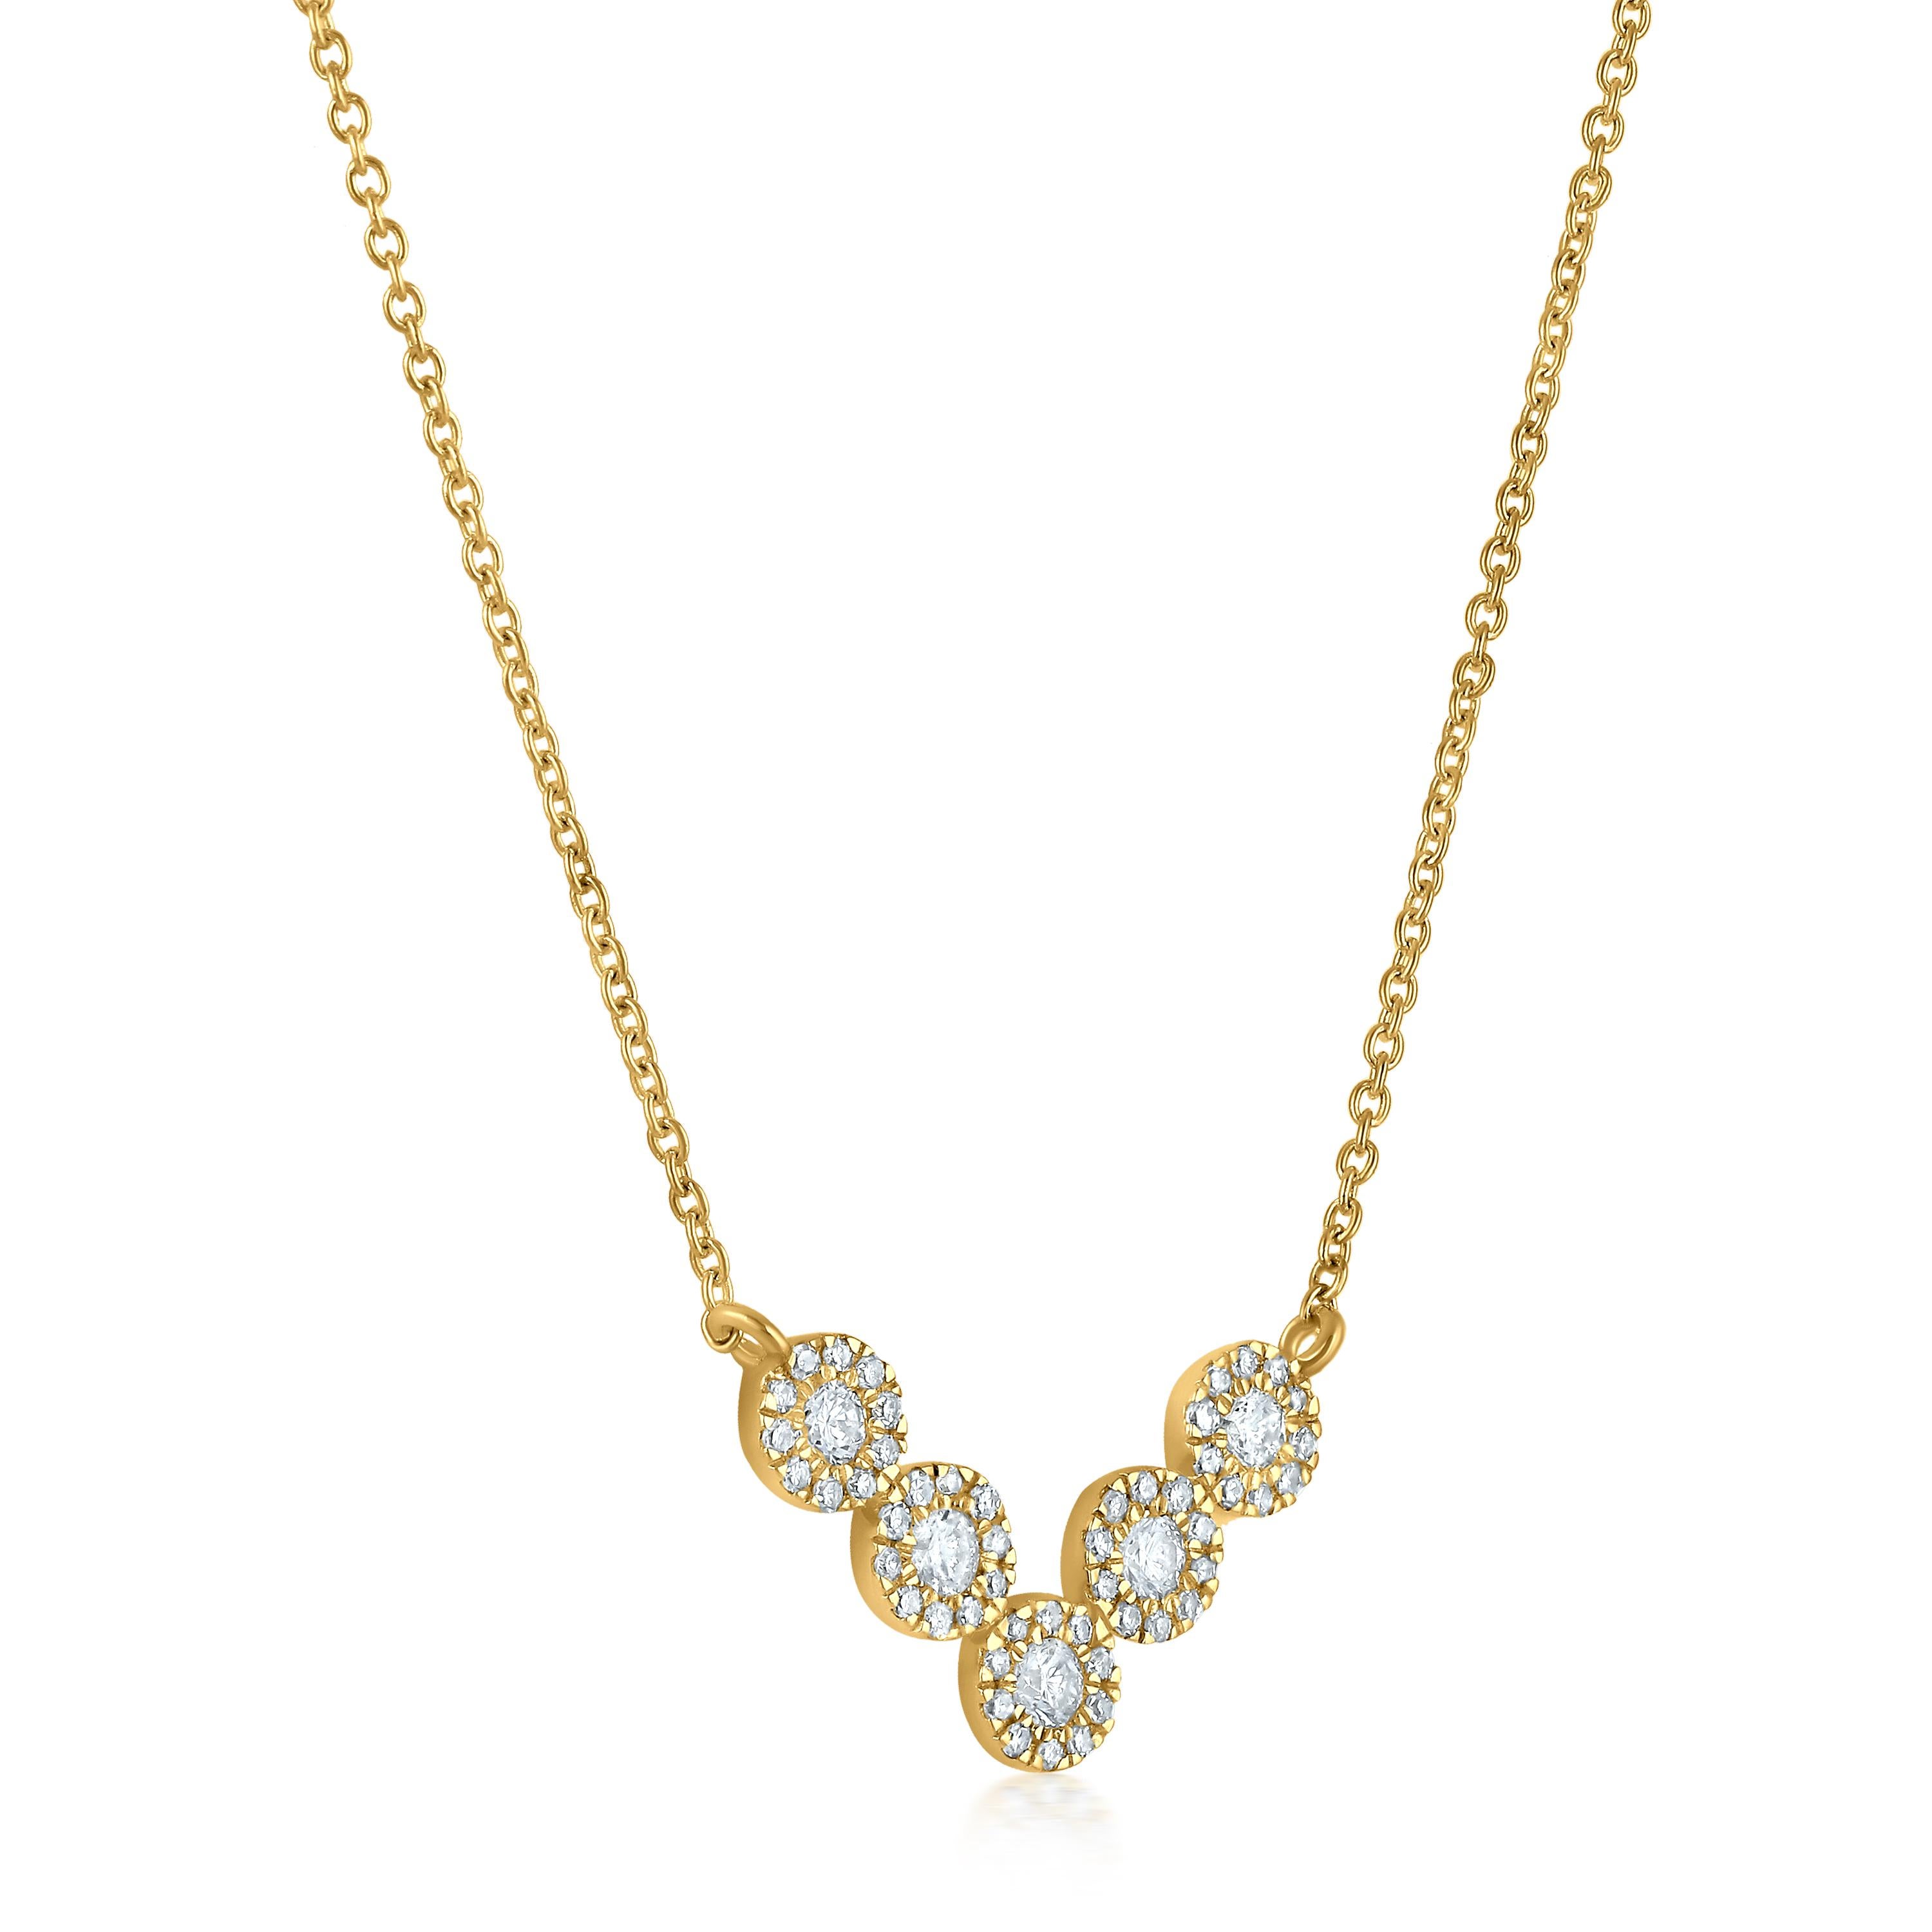 Complete your chic look with this Luxle 14k gold diamond chevron necklace. This exquisite item is set with 0.32 carats of round full-cut and single-cut diamonds and is framed with traditional circular motifs that will last for years. Ideal for